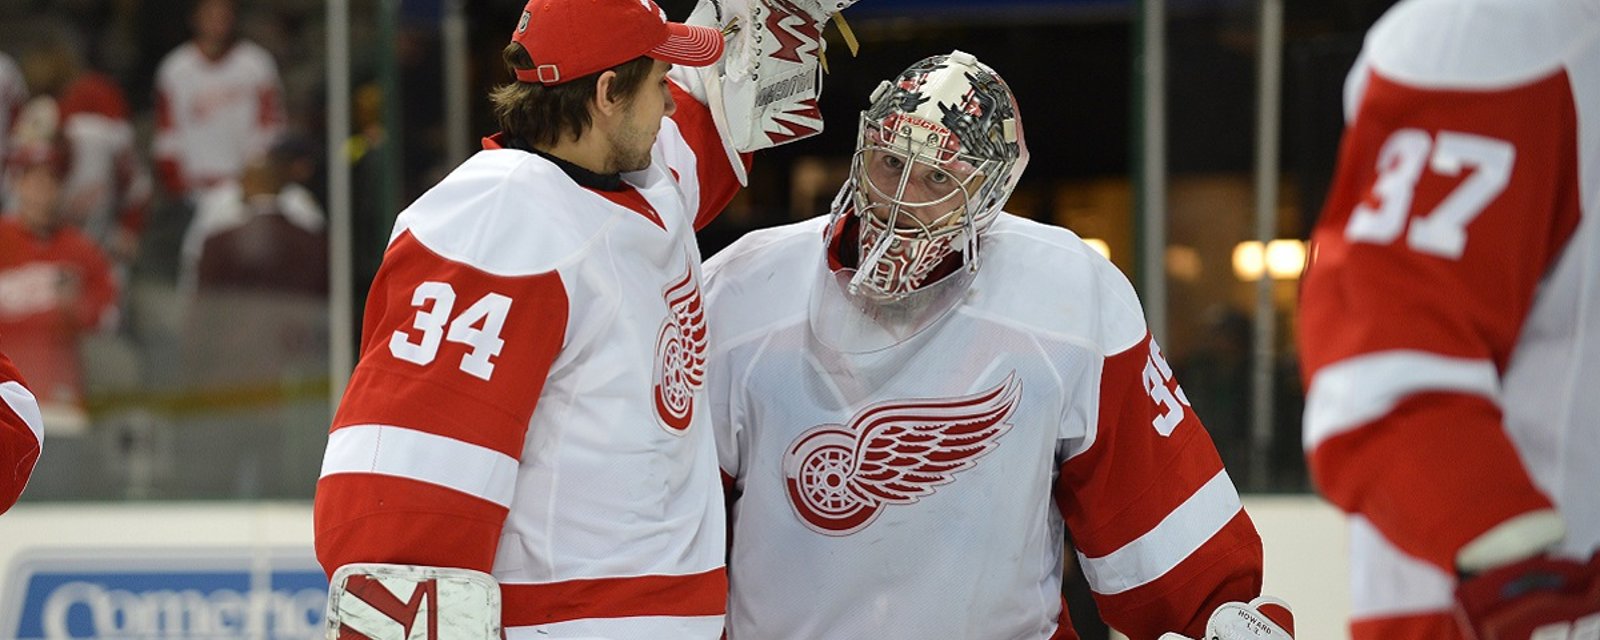 Goalie trades in the last month could open the door for a trade from the Red Wings.